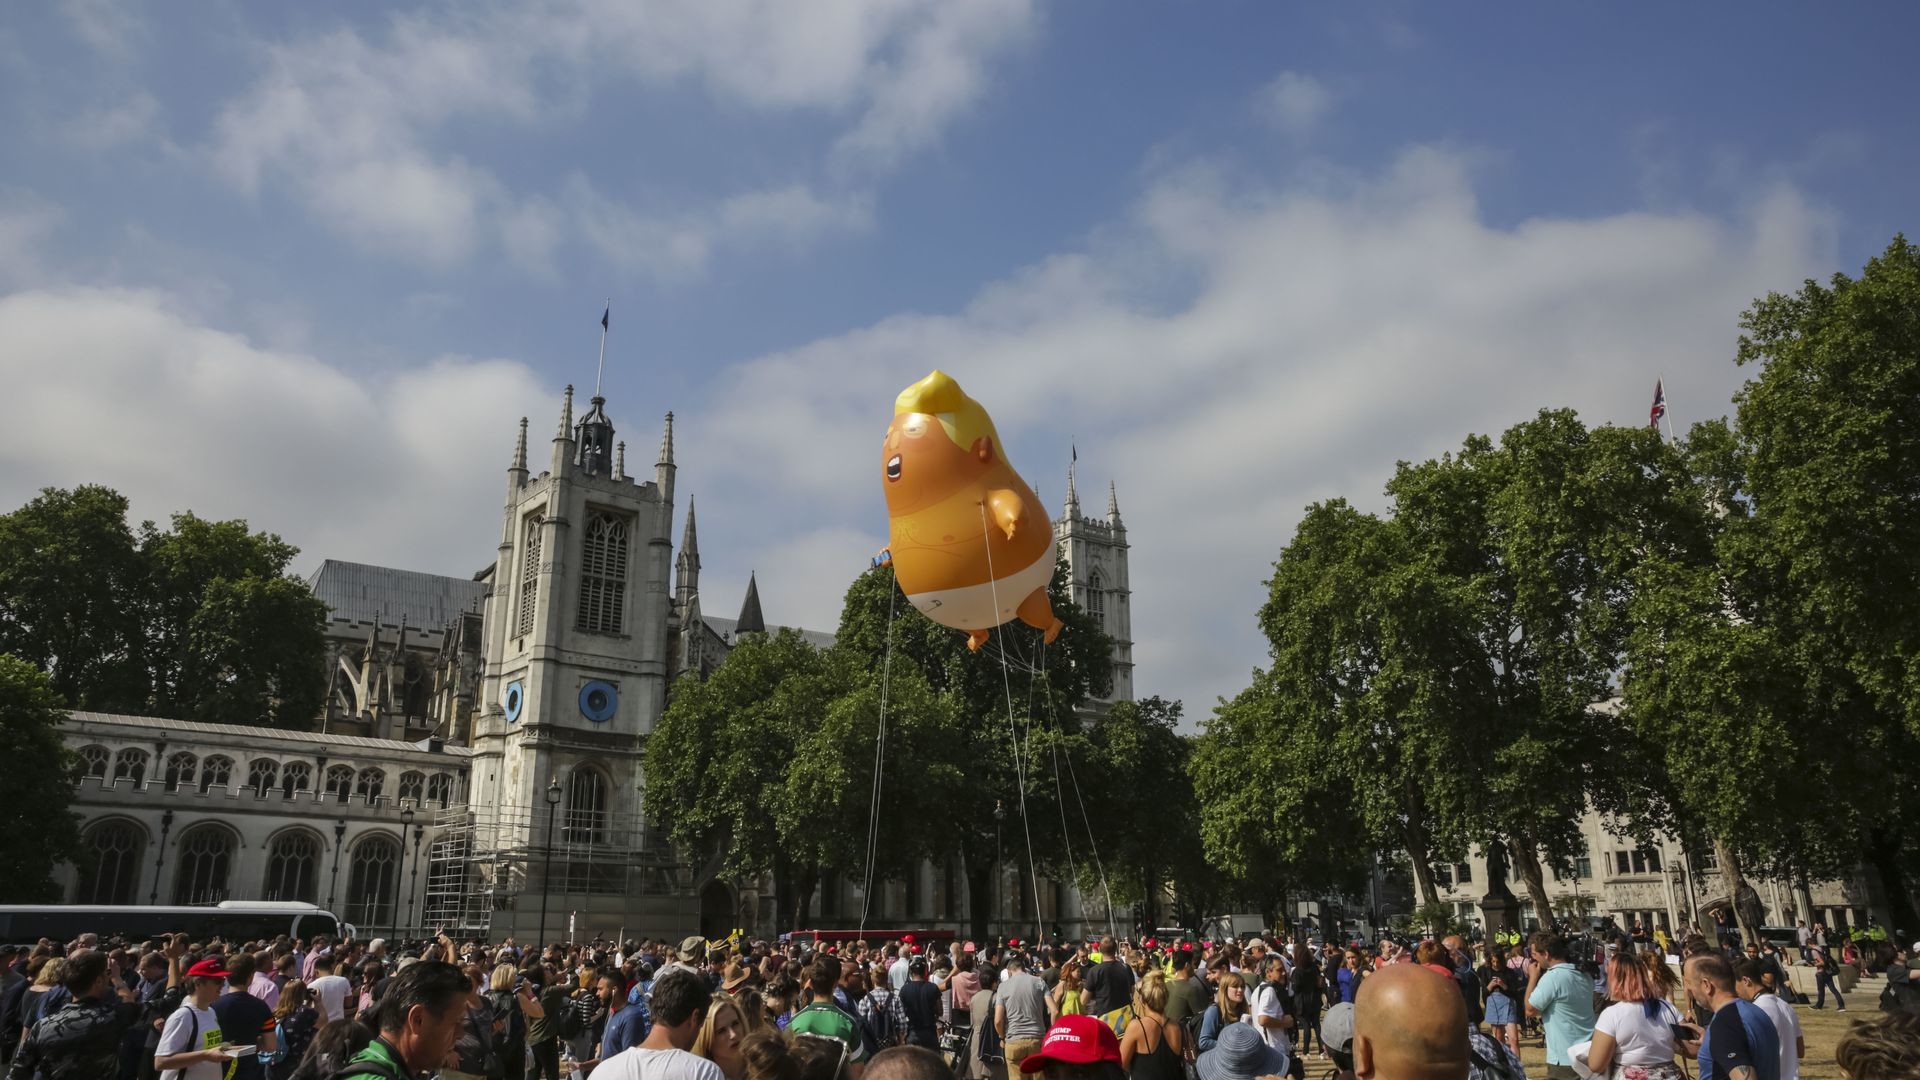 1920x1080 In photos: Tens of thousands fill London's streets to protest Trump